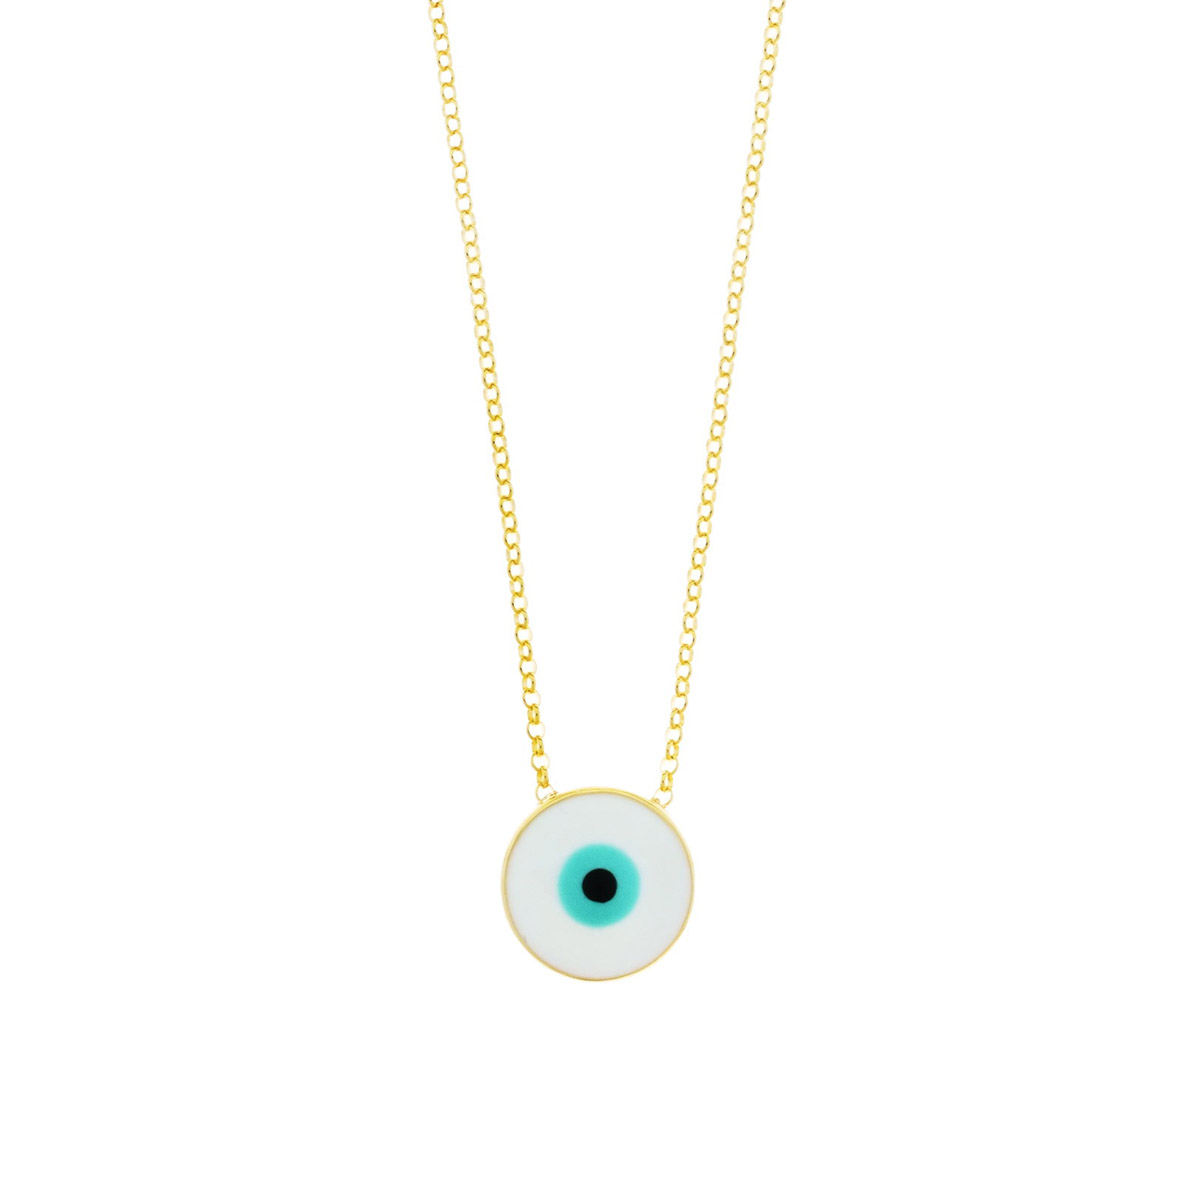 GREGIO Round Evil Eye Necklace with White Enamel – Gold Plated Silver 925